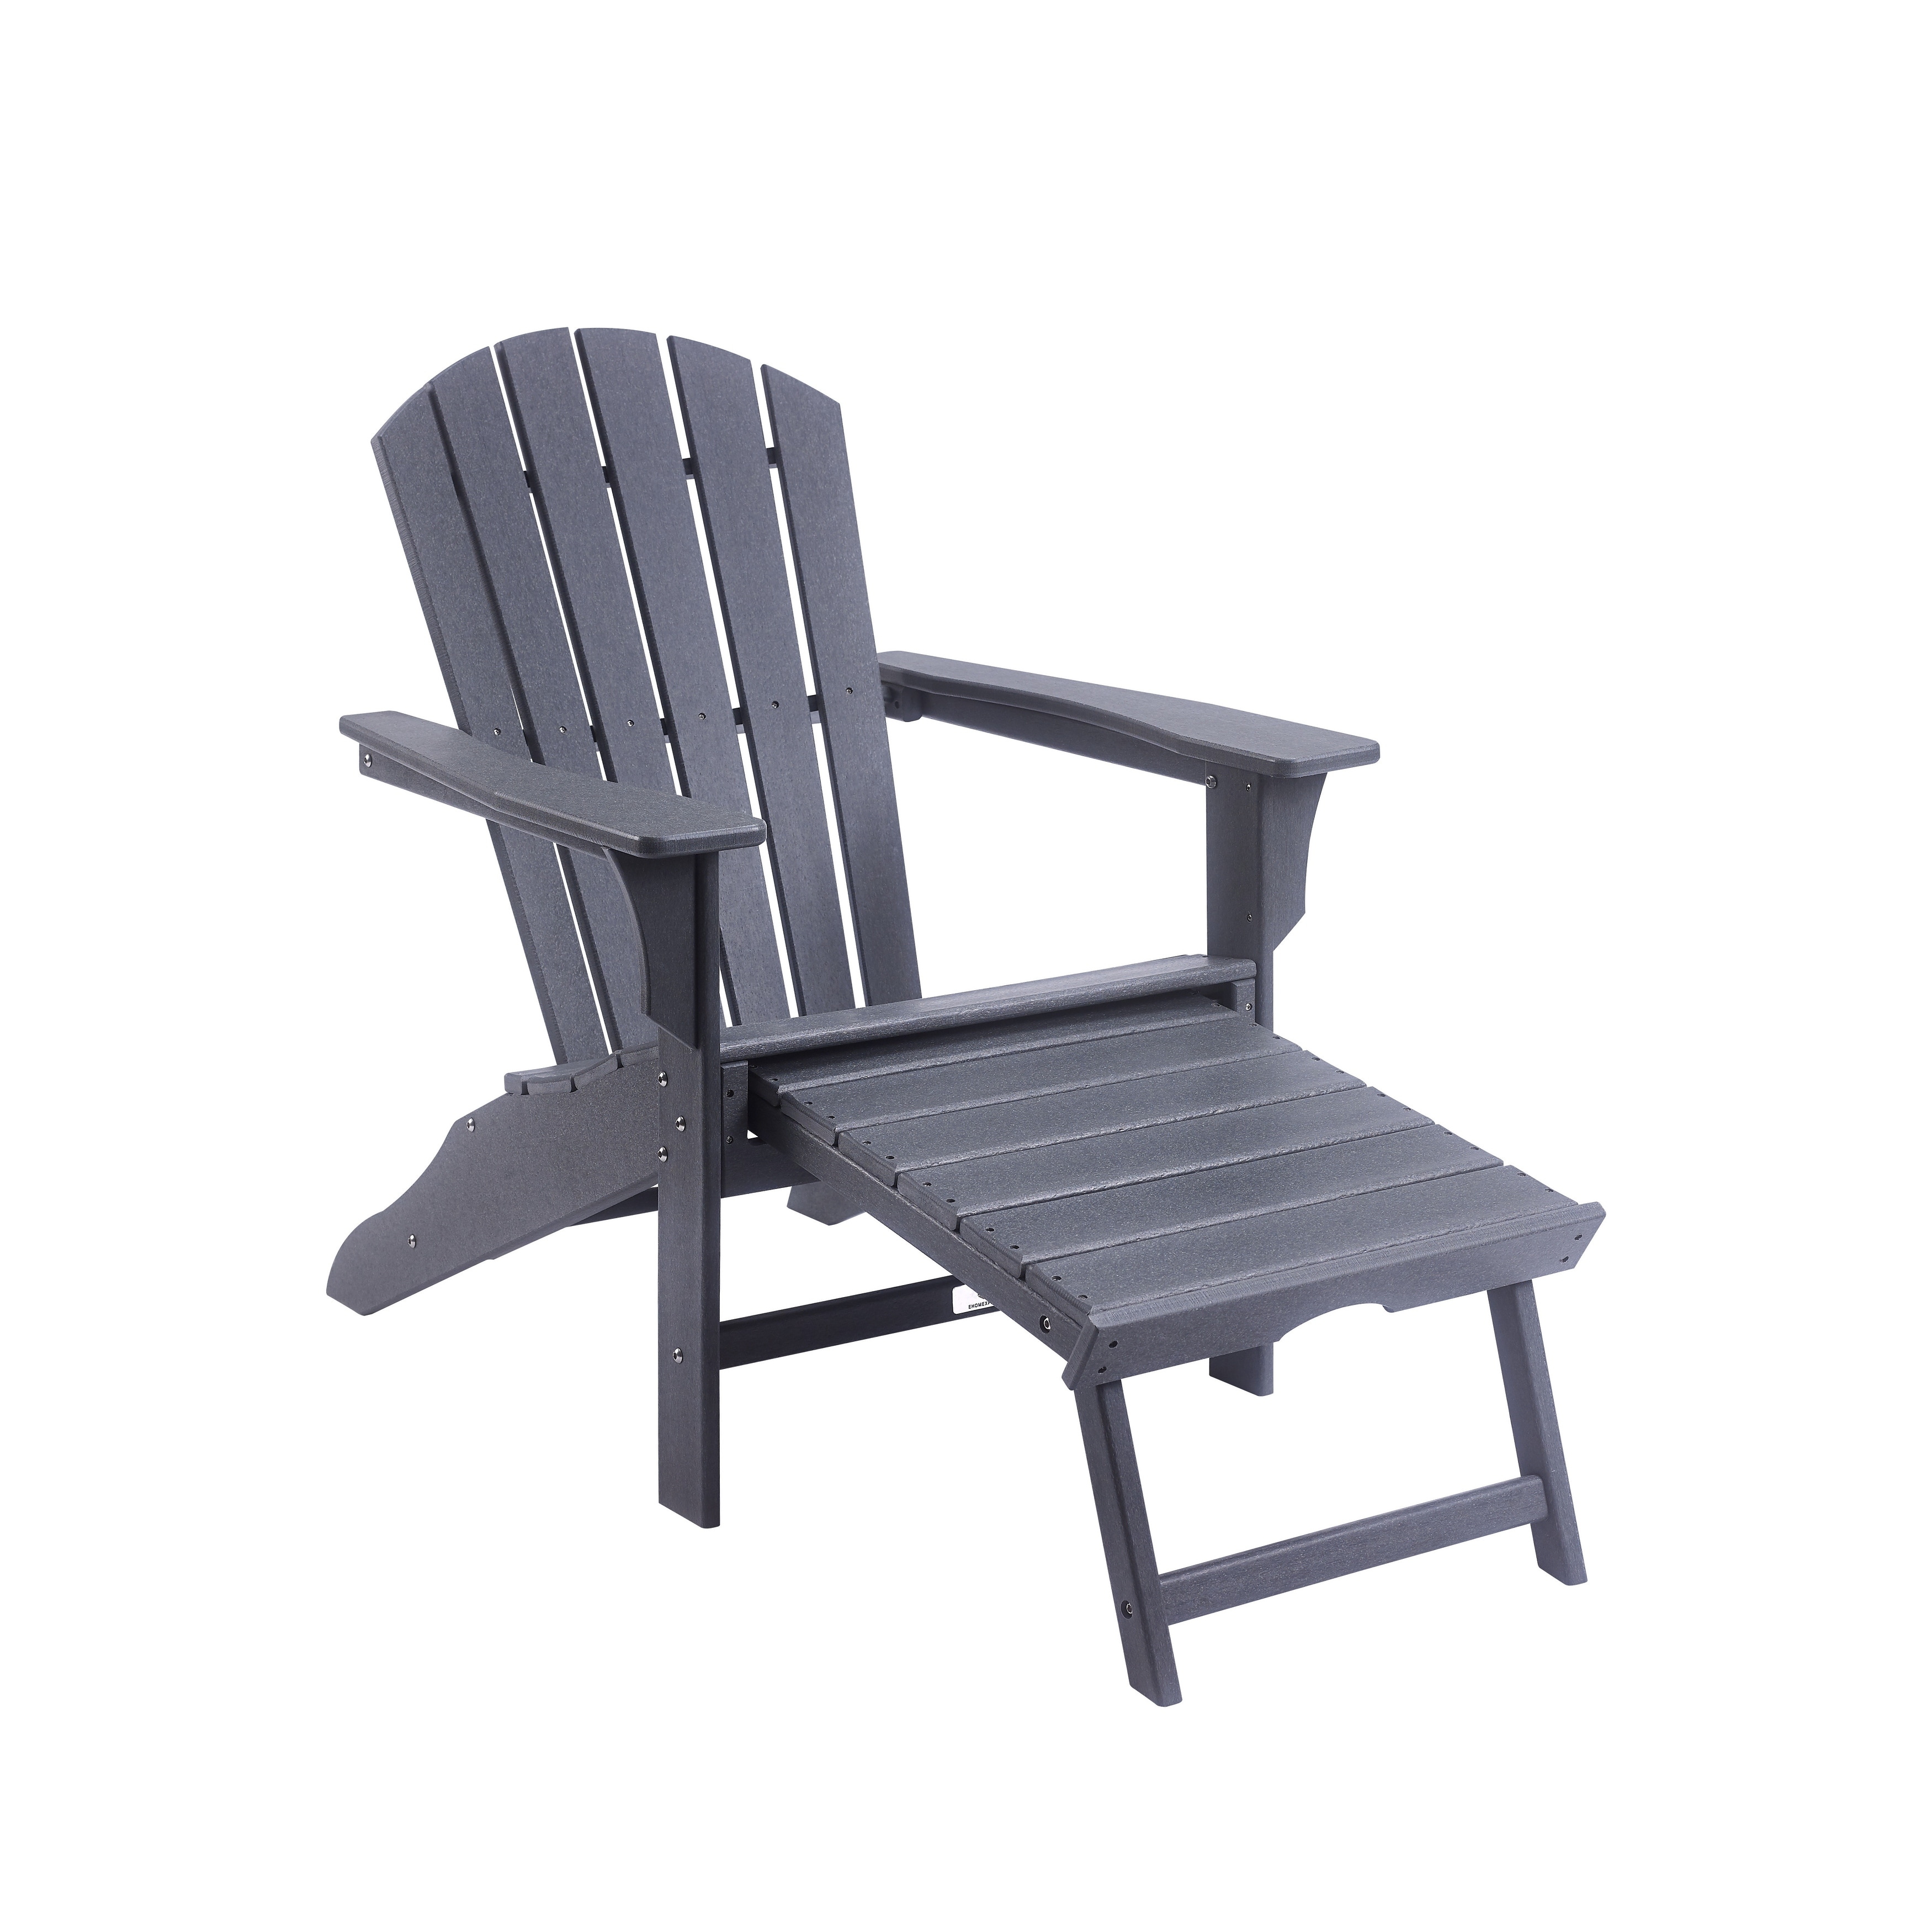 Classic Plastic Outdoor Patio Adirondack Chair With Footrest